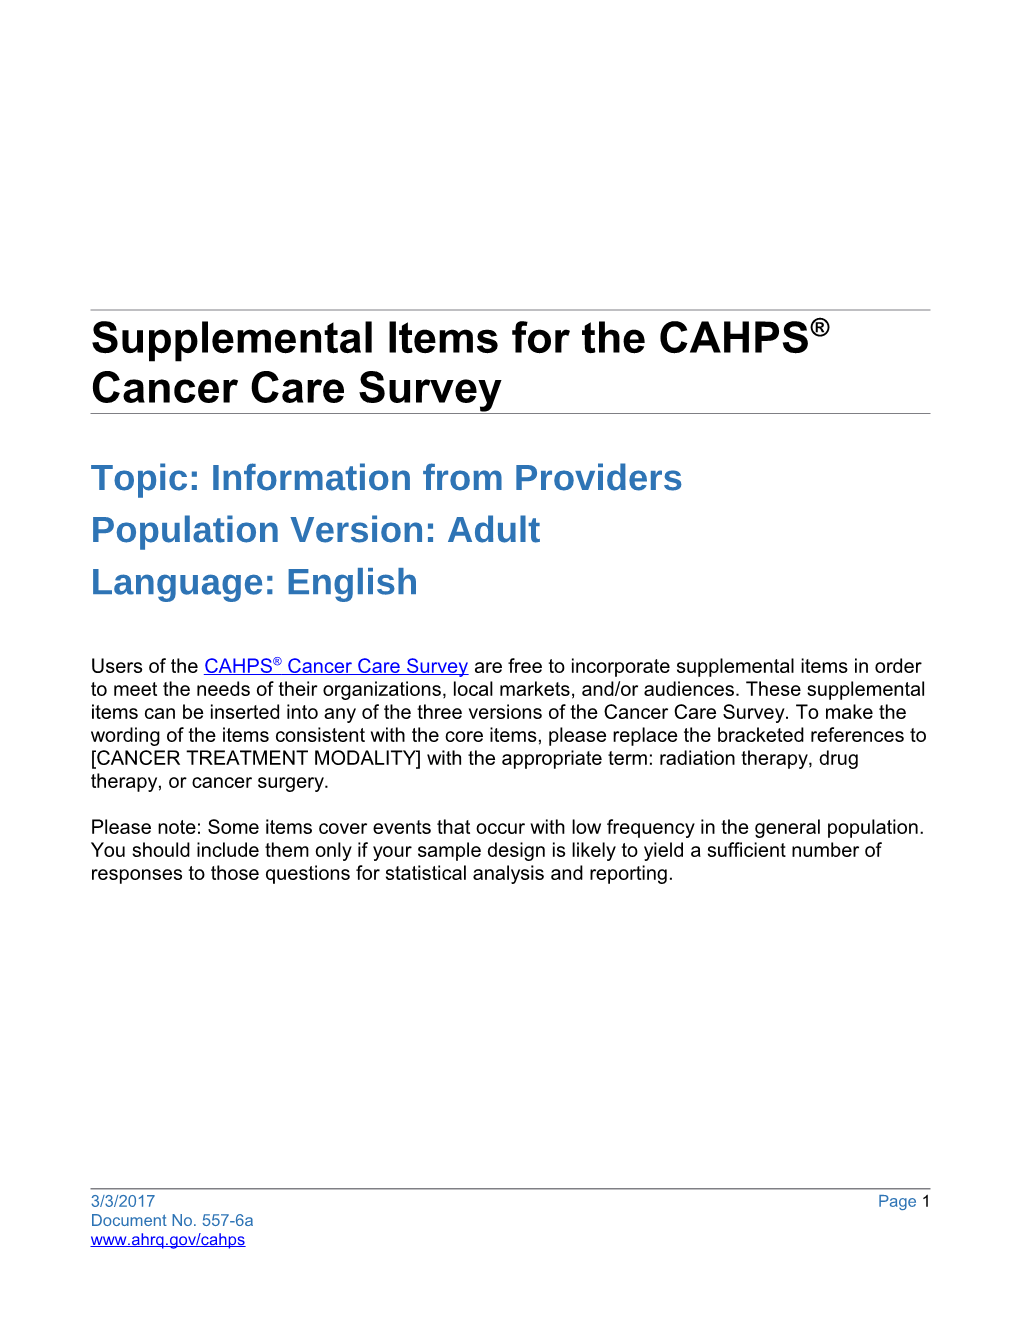 CAHPS Cancer Care Supplemental Items s1